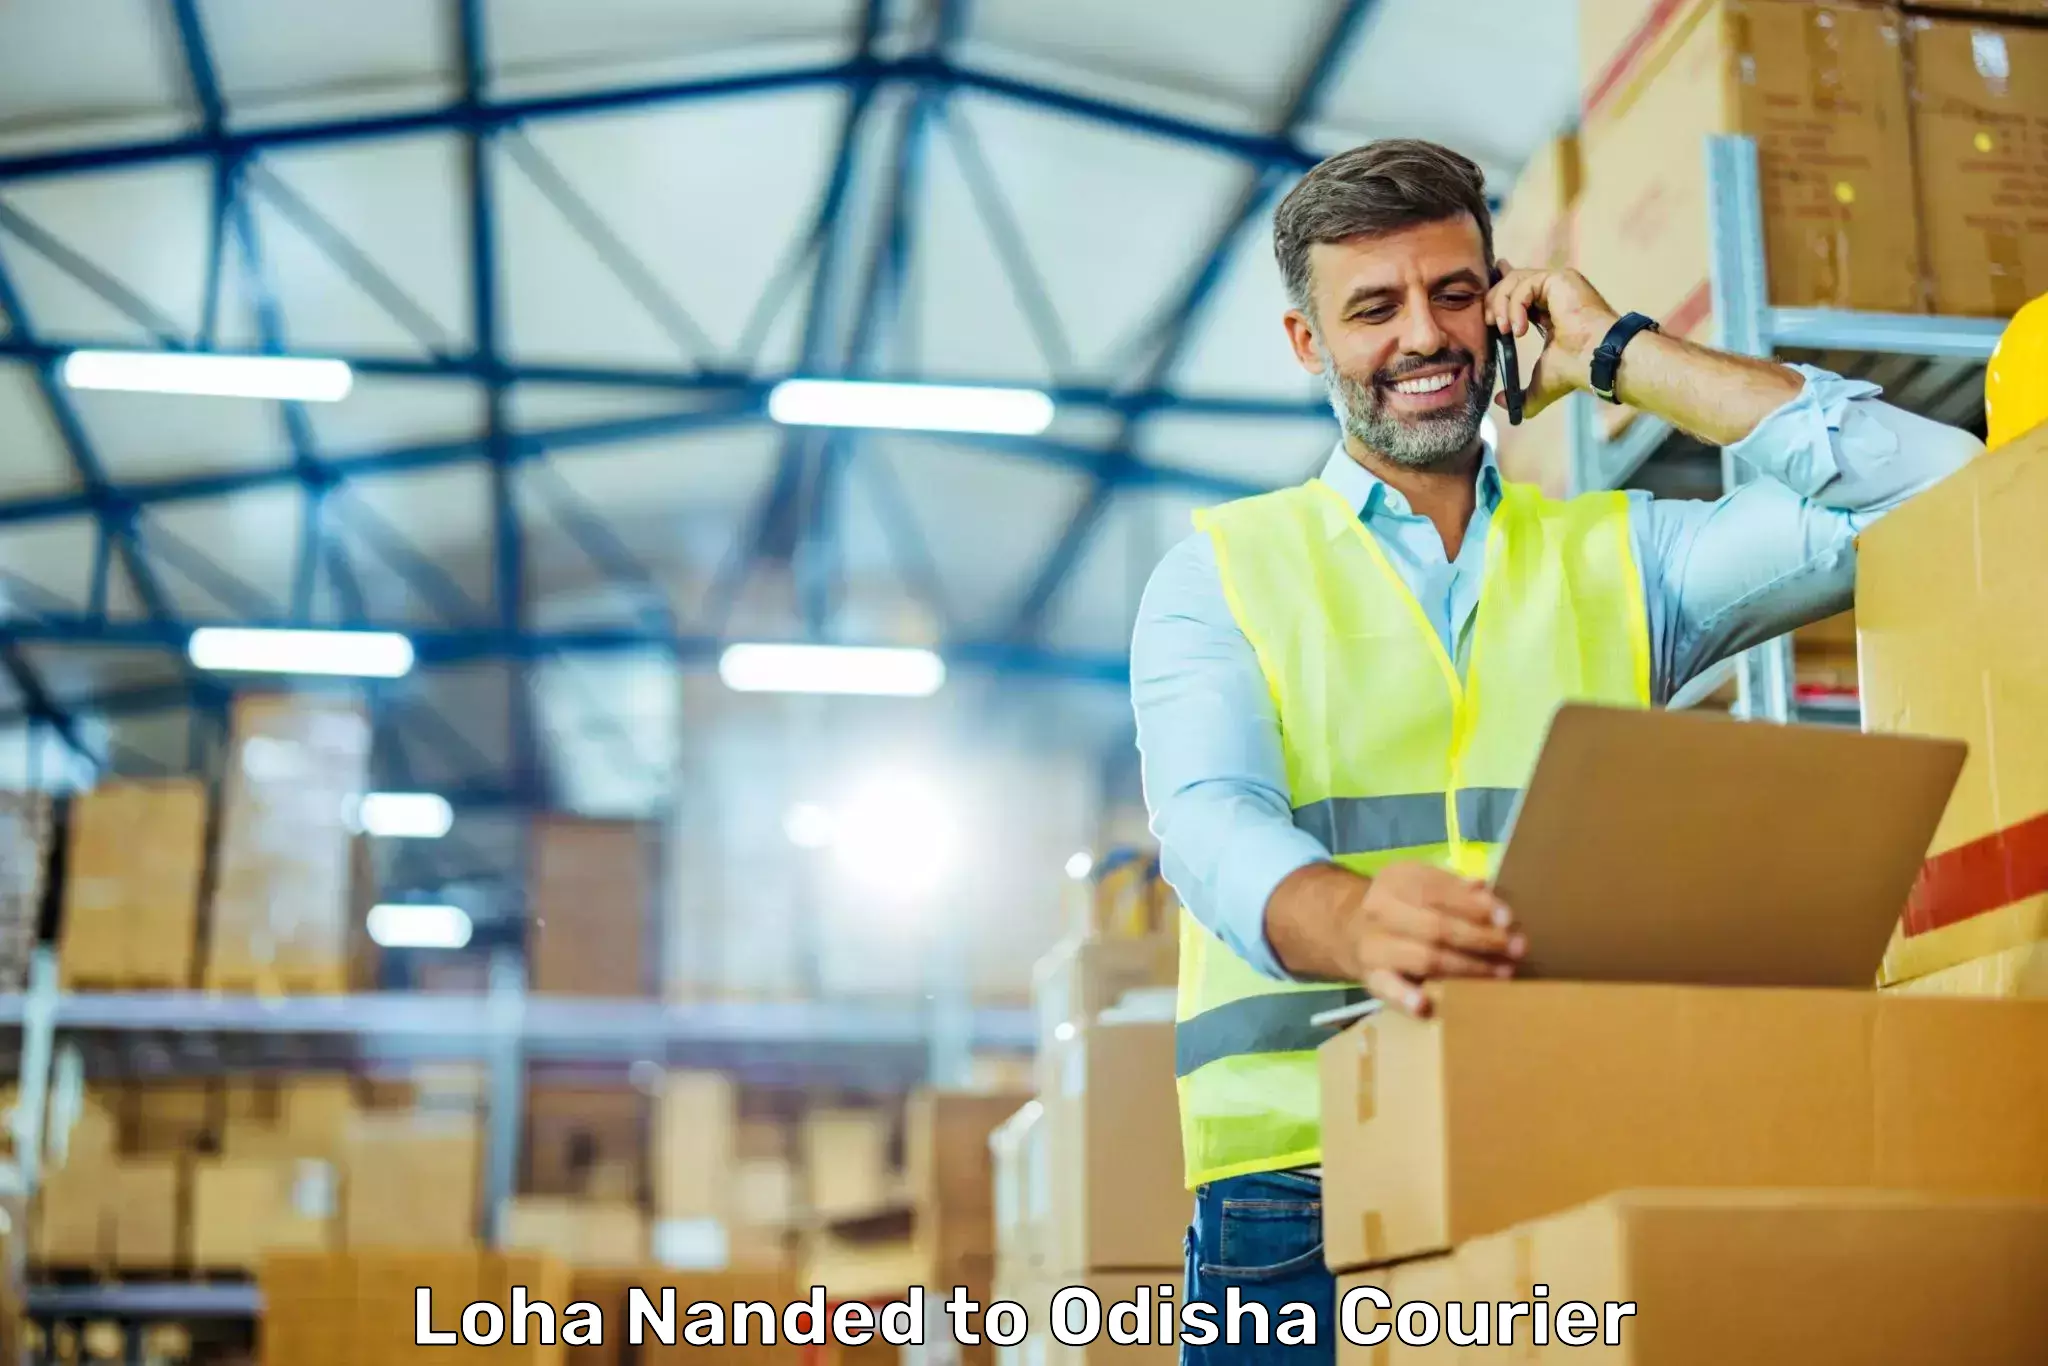 Bulk courier orders Loha Nanded to Paradip Port